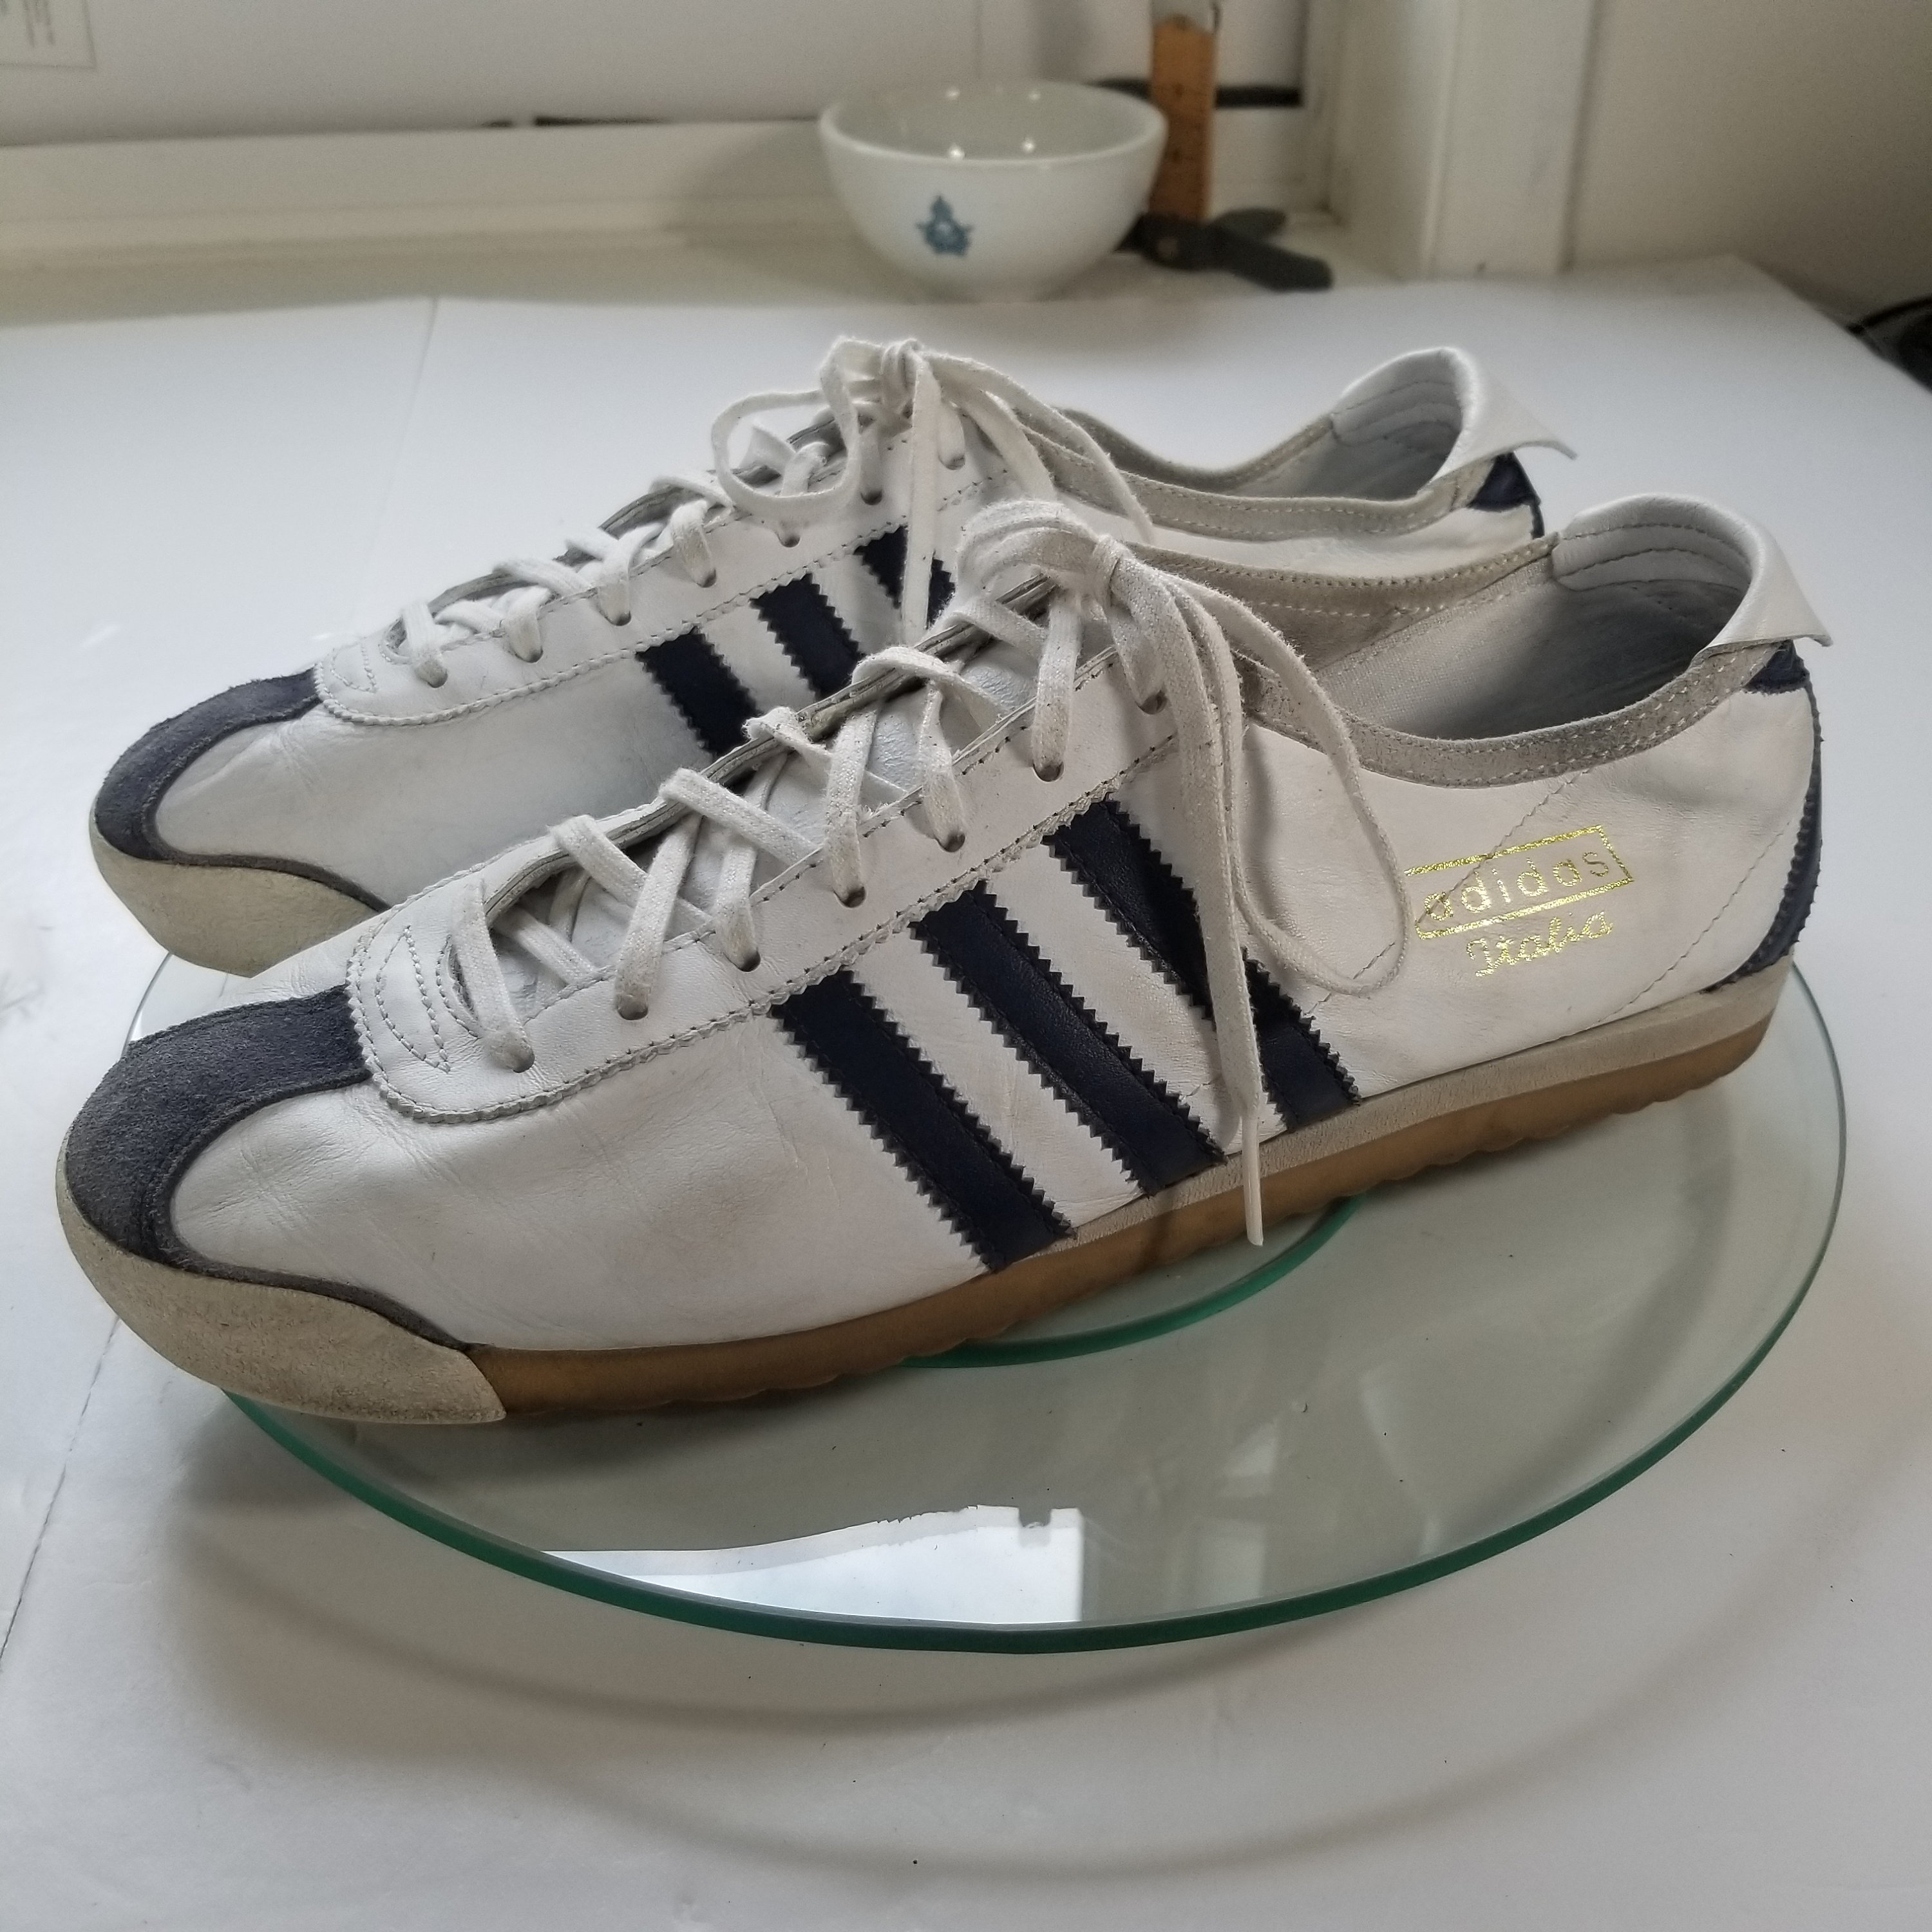 Rare Vintage 1970s Adidas Running Shoes AC 1618 ROM Canada